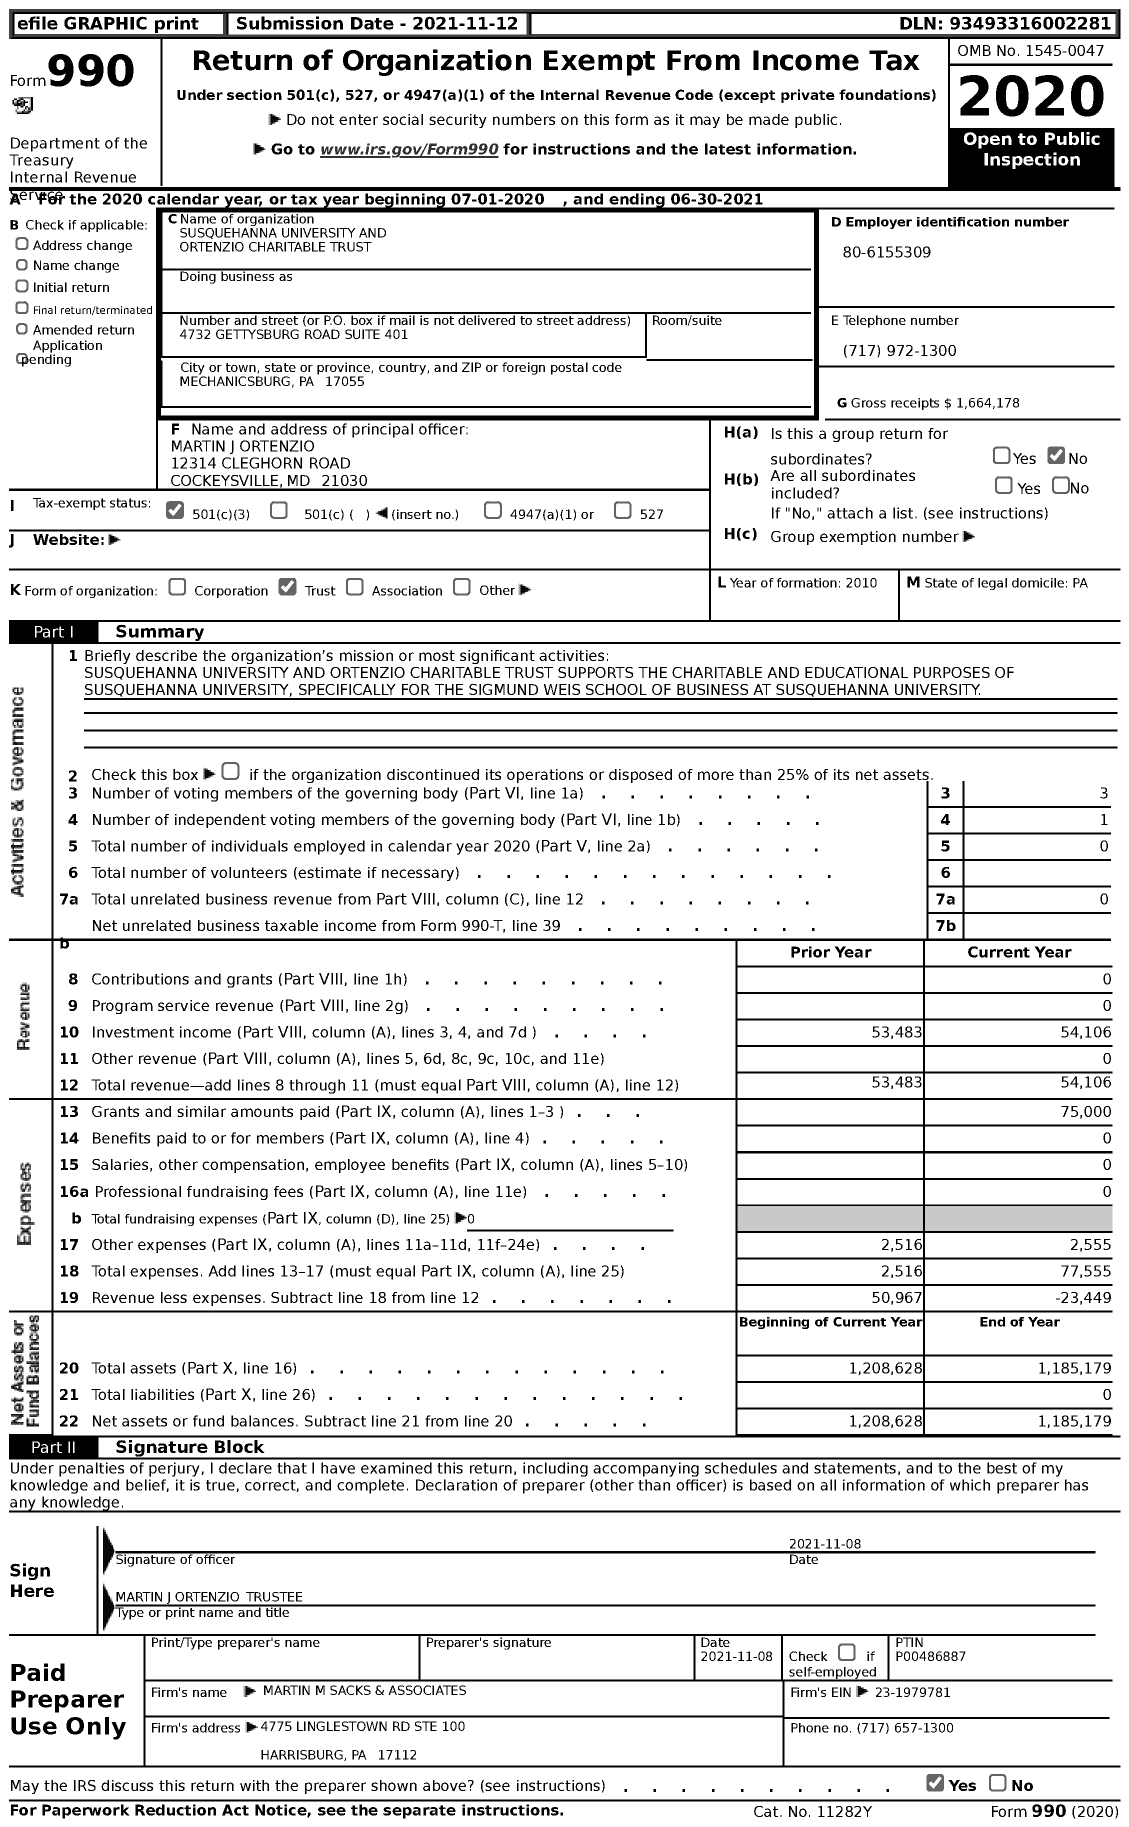 Image of first page of 2020 Form 990 for Susquehanna University and Ortenzio Charitable Trust